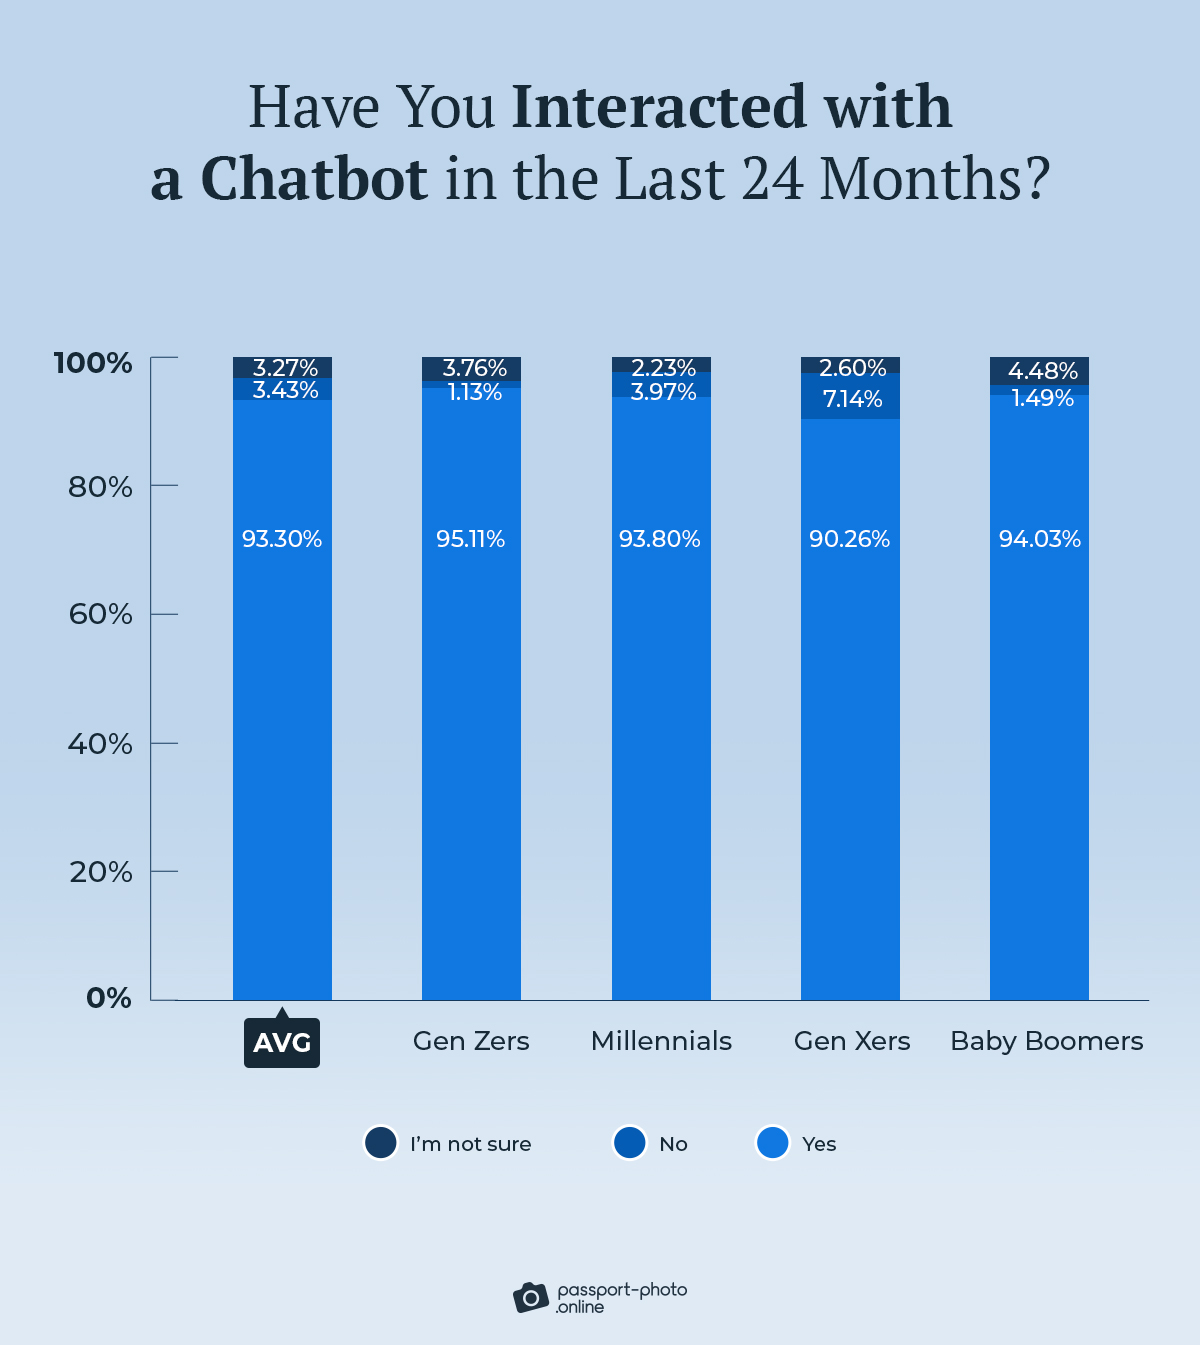 Have you interacted with a chatbot in the last 24 months?